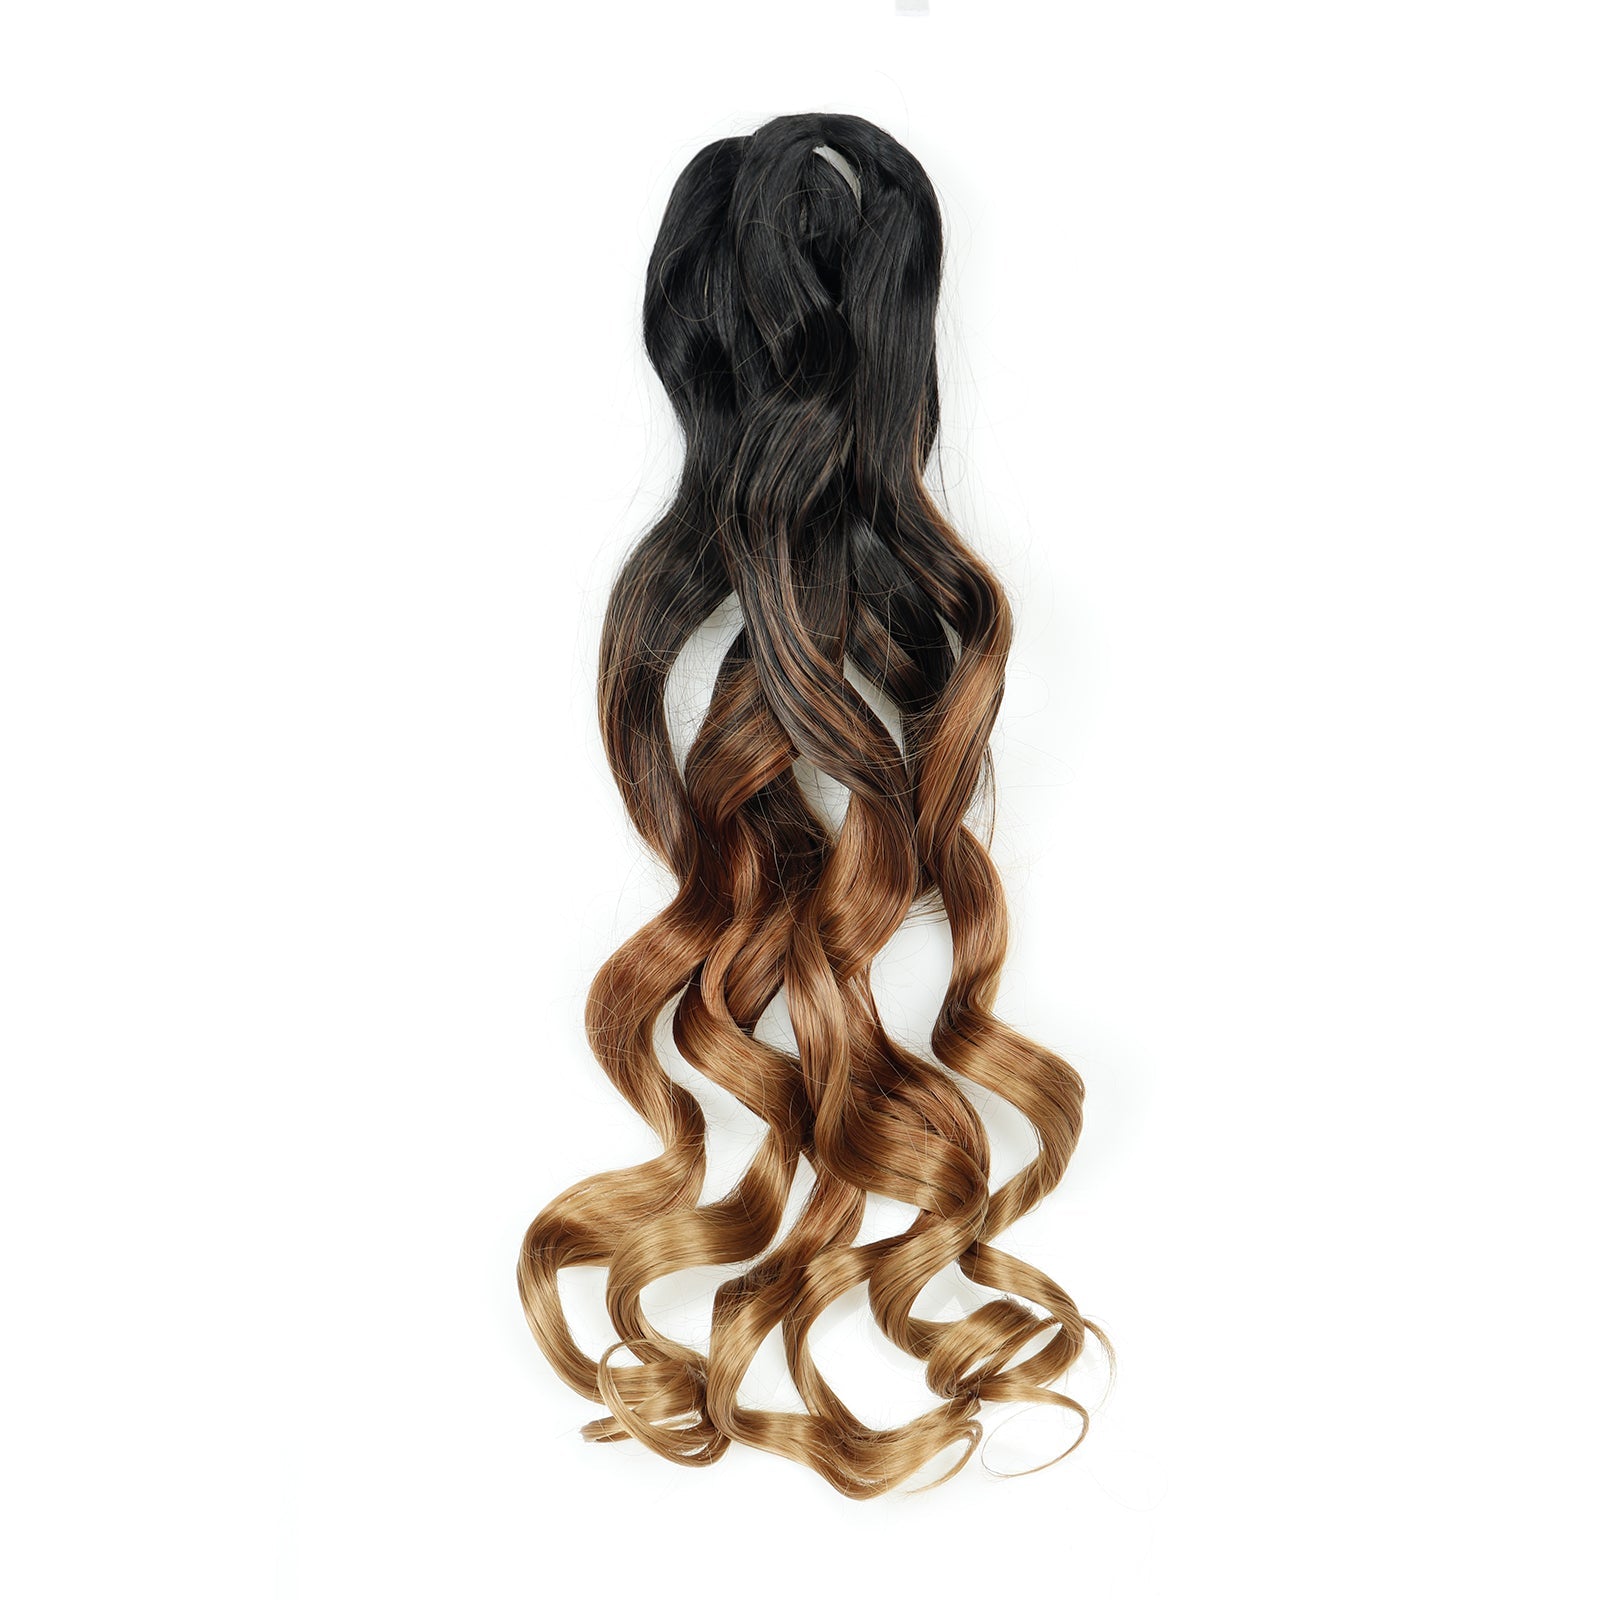 𝗚𝗲𝗺𝗶𝗻𝗶 | Curly End Pre-stretched Braiding Hair 20-24 Inch | Loose Wave Curly End Crochet Box Braids Synthetic Braiding Hair